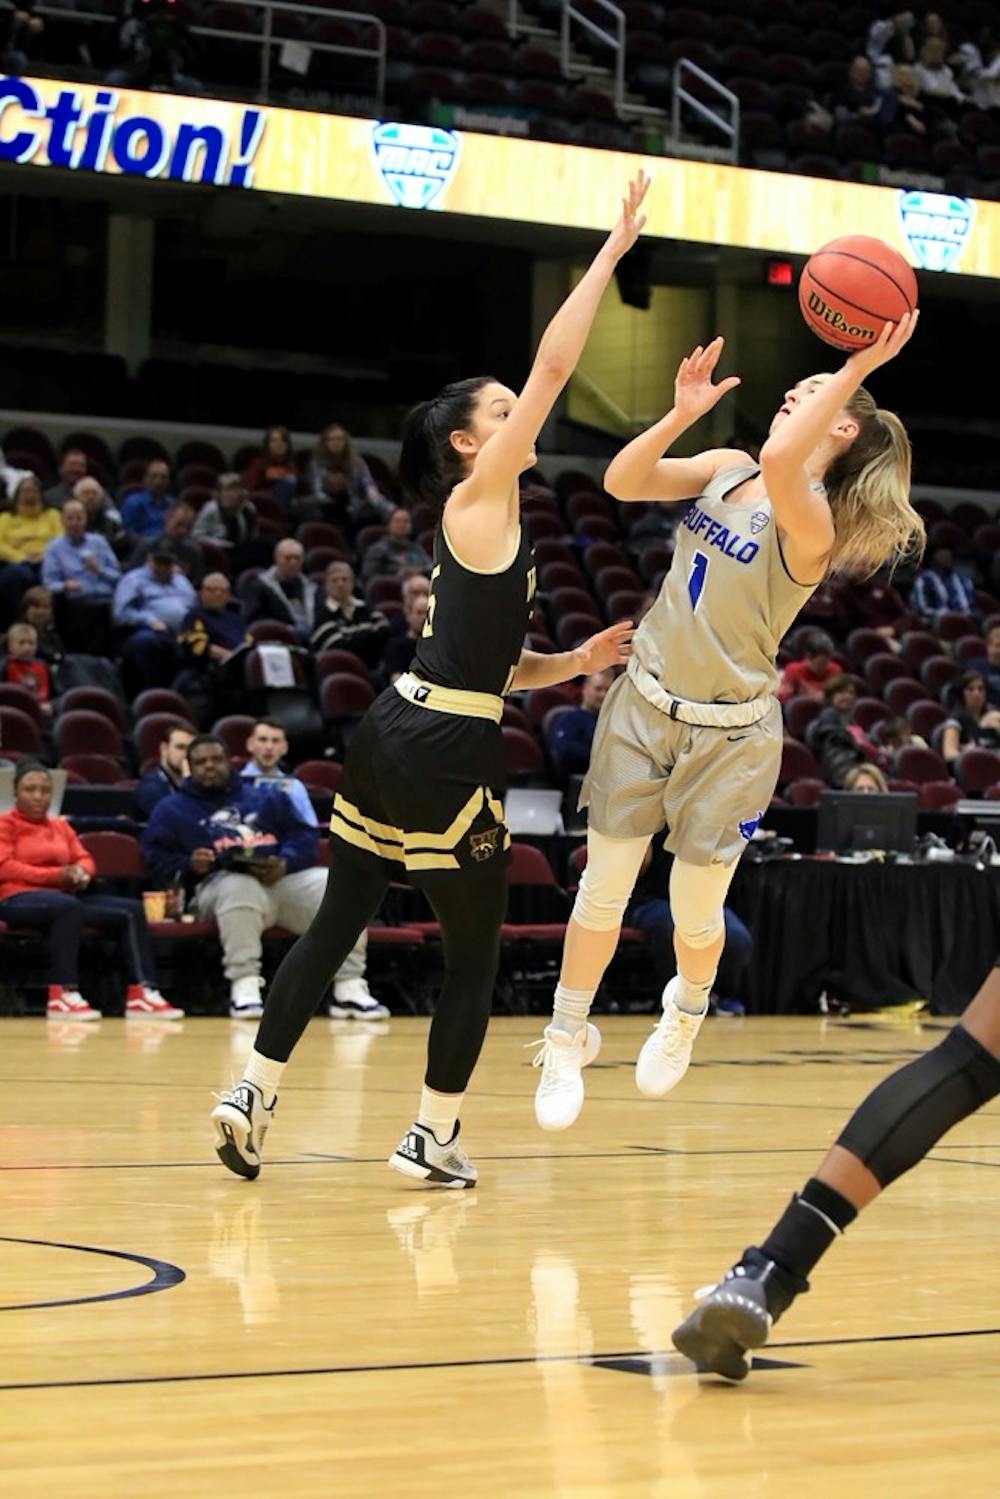 <p>Senior guard Stephanie Reid looks for the layup in the crowded paint. The Bulls made program history Monday securing the team's first appearance in the Sweet Sixteen of the NCAA Tournament.&nbsp;</p>